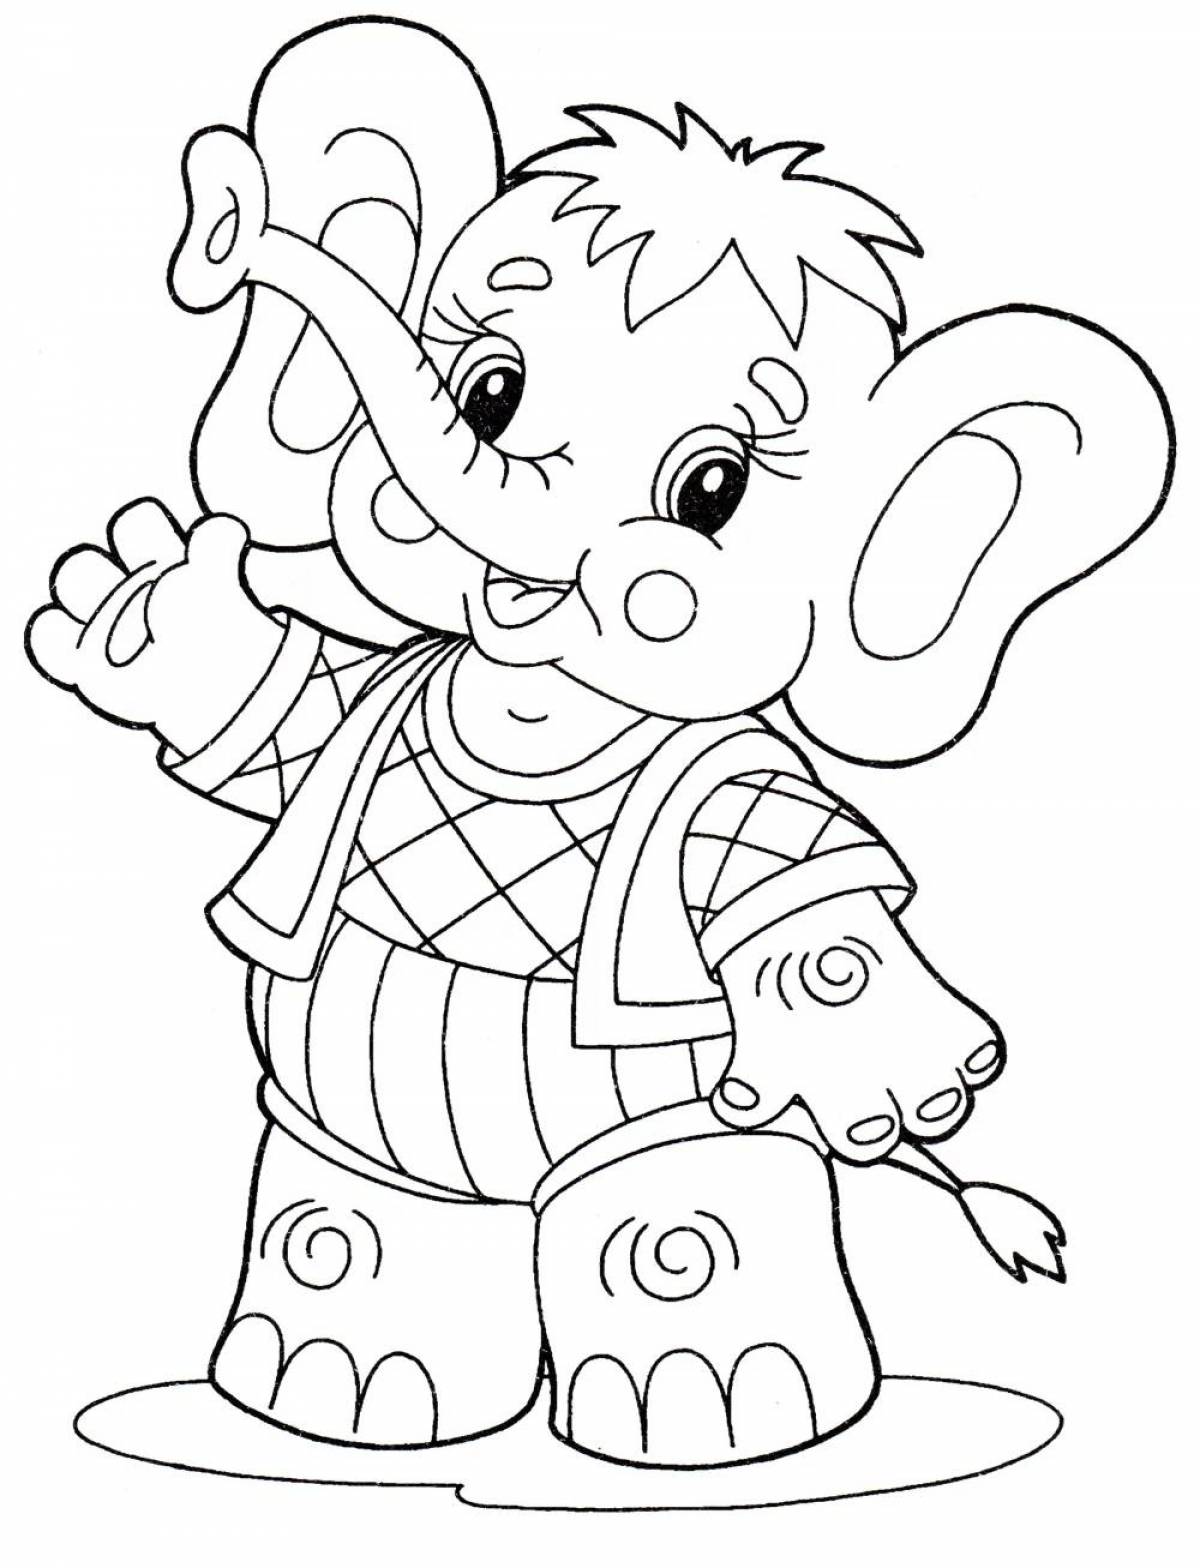 Live coloring baby elephant